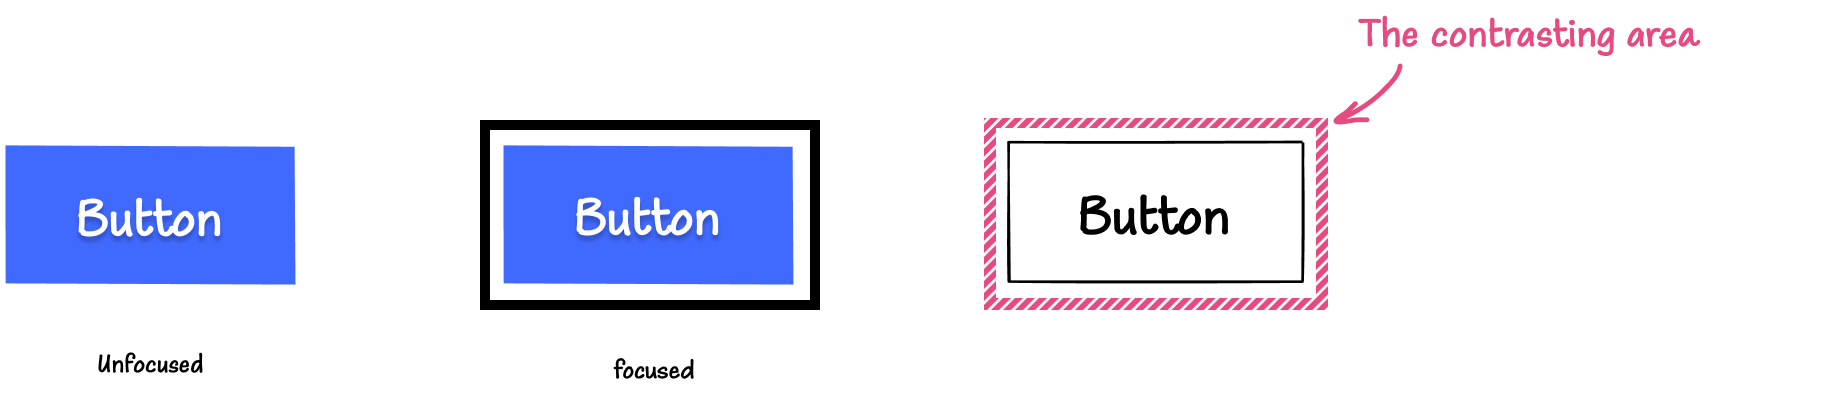 Illustration: On the left is a blue button with a white label in its default, unfocused state. In the middle is the blue button with a separated thick black outline. On the right, is a button with the same outline but with a pattern applied to it, indicating that this patterned area is the contrasting area.